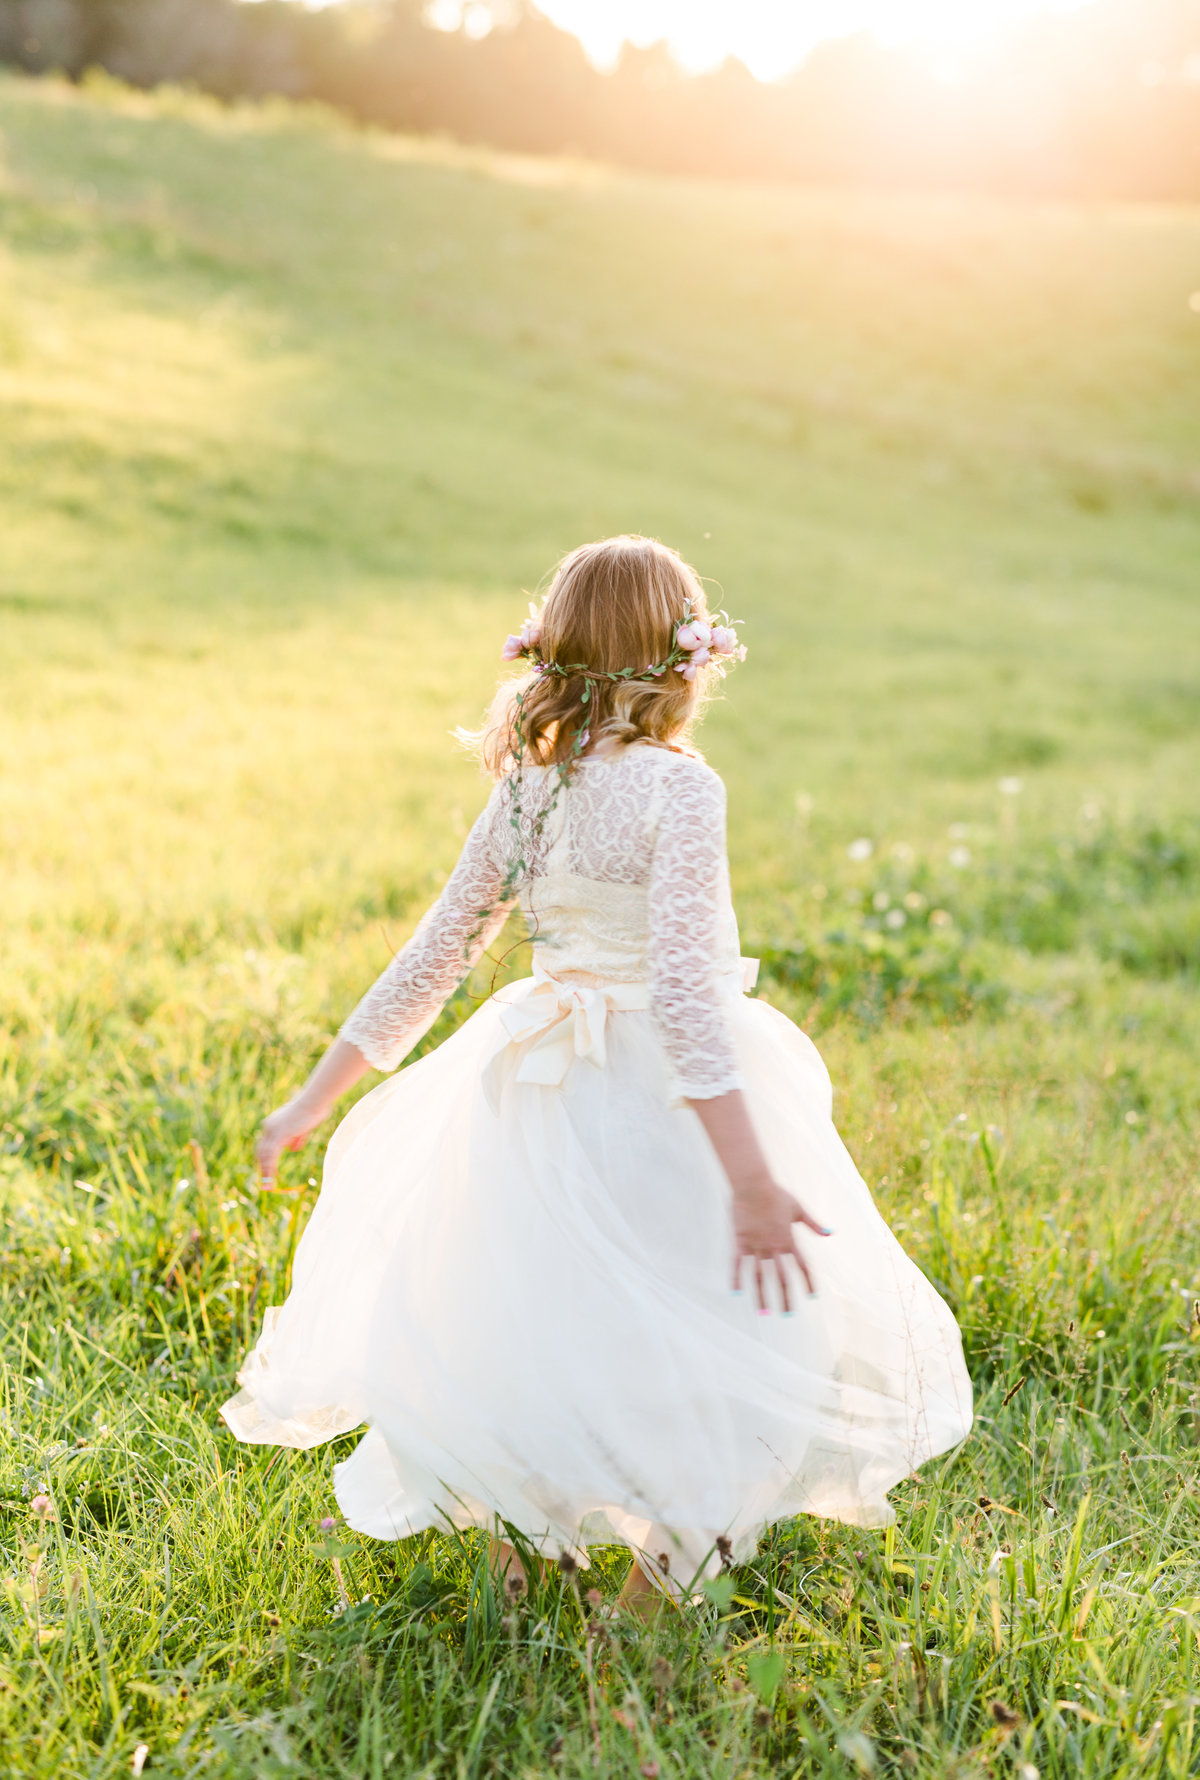 Young girl twirling at Abingdon Farm photo session